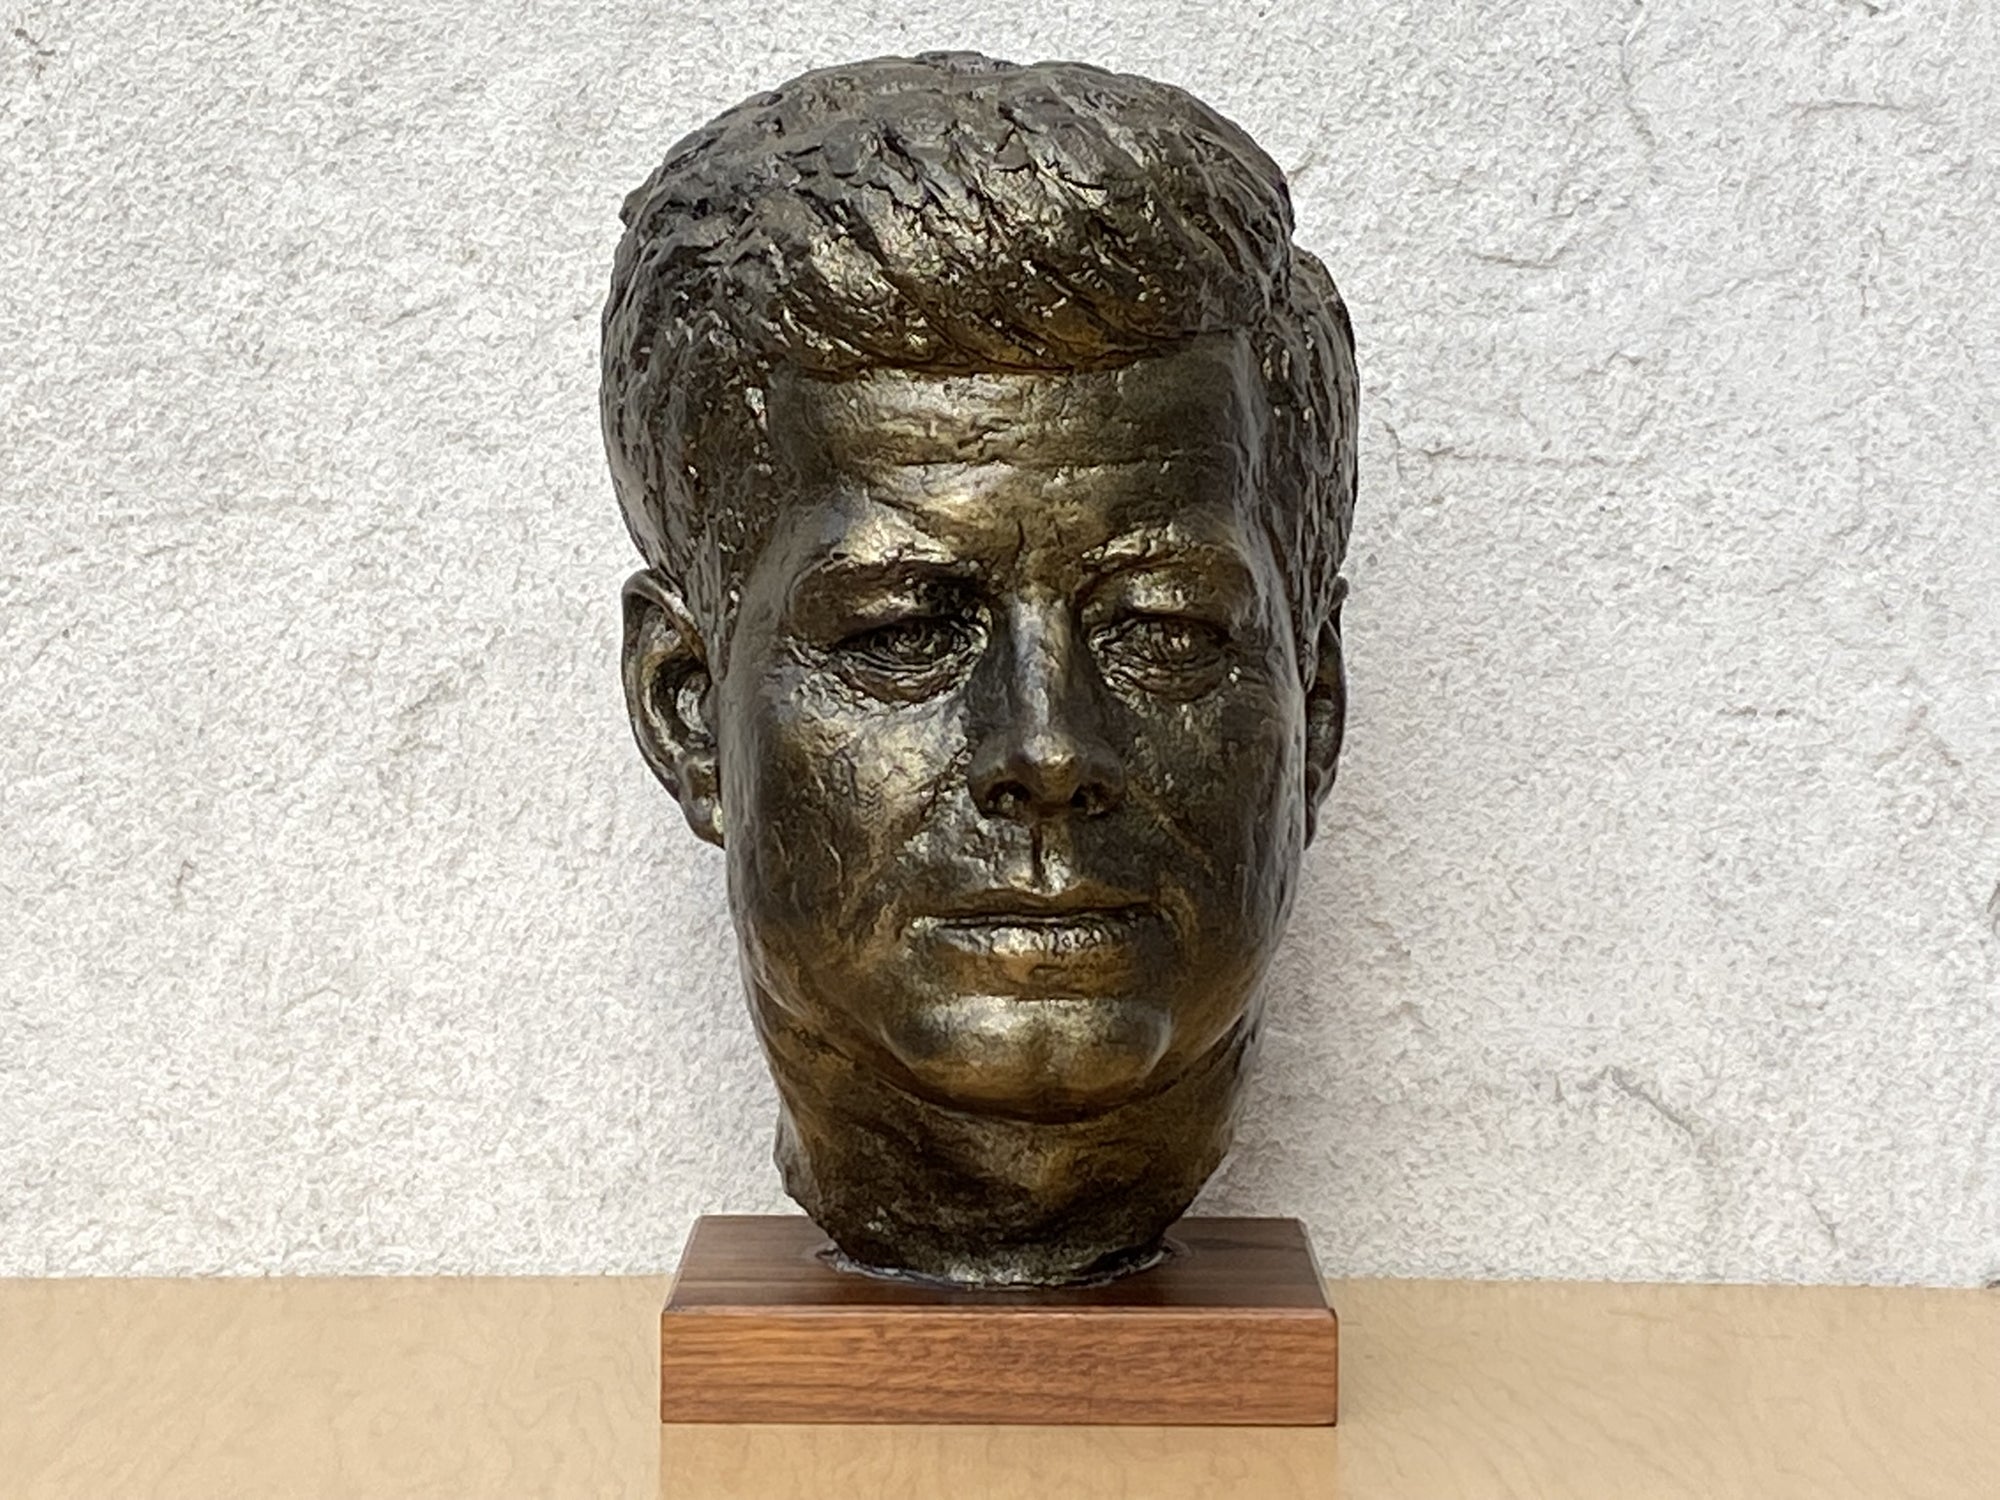 SAVING A JFK BUST, WITH RESPECT